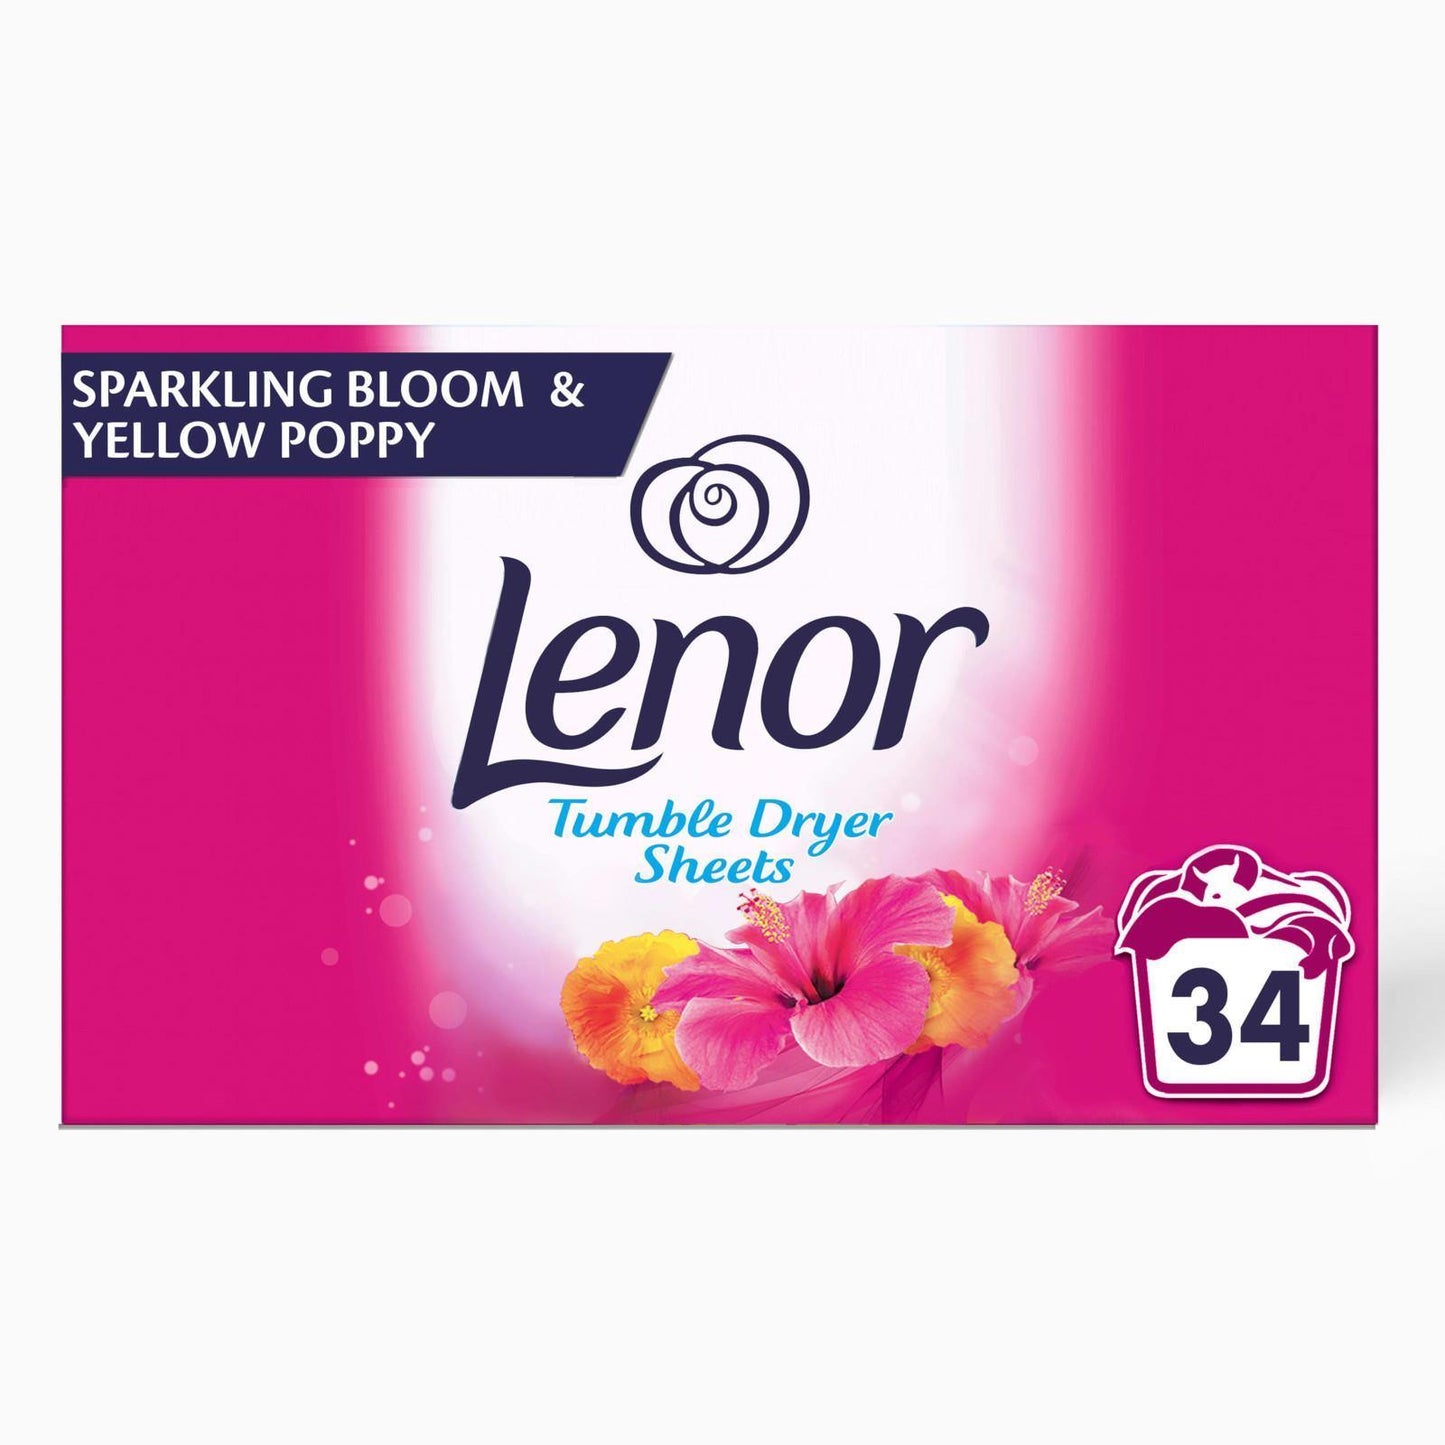 Lenor Tumble Dryer Sheets Sparkling Bloom & Yellow Poppy 34 Sheets